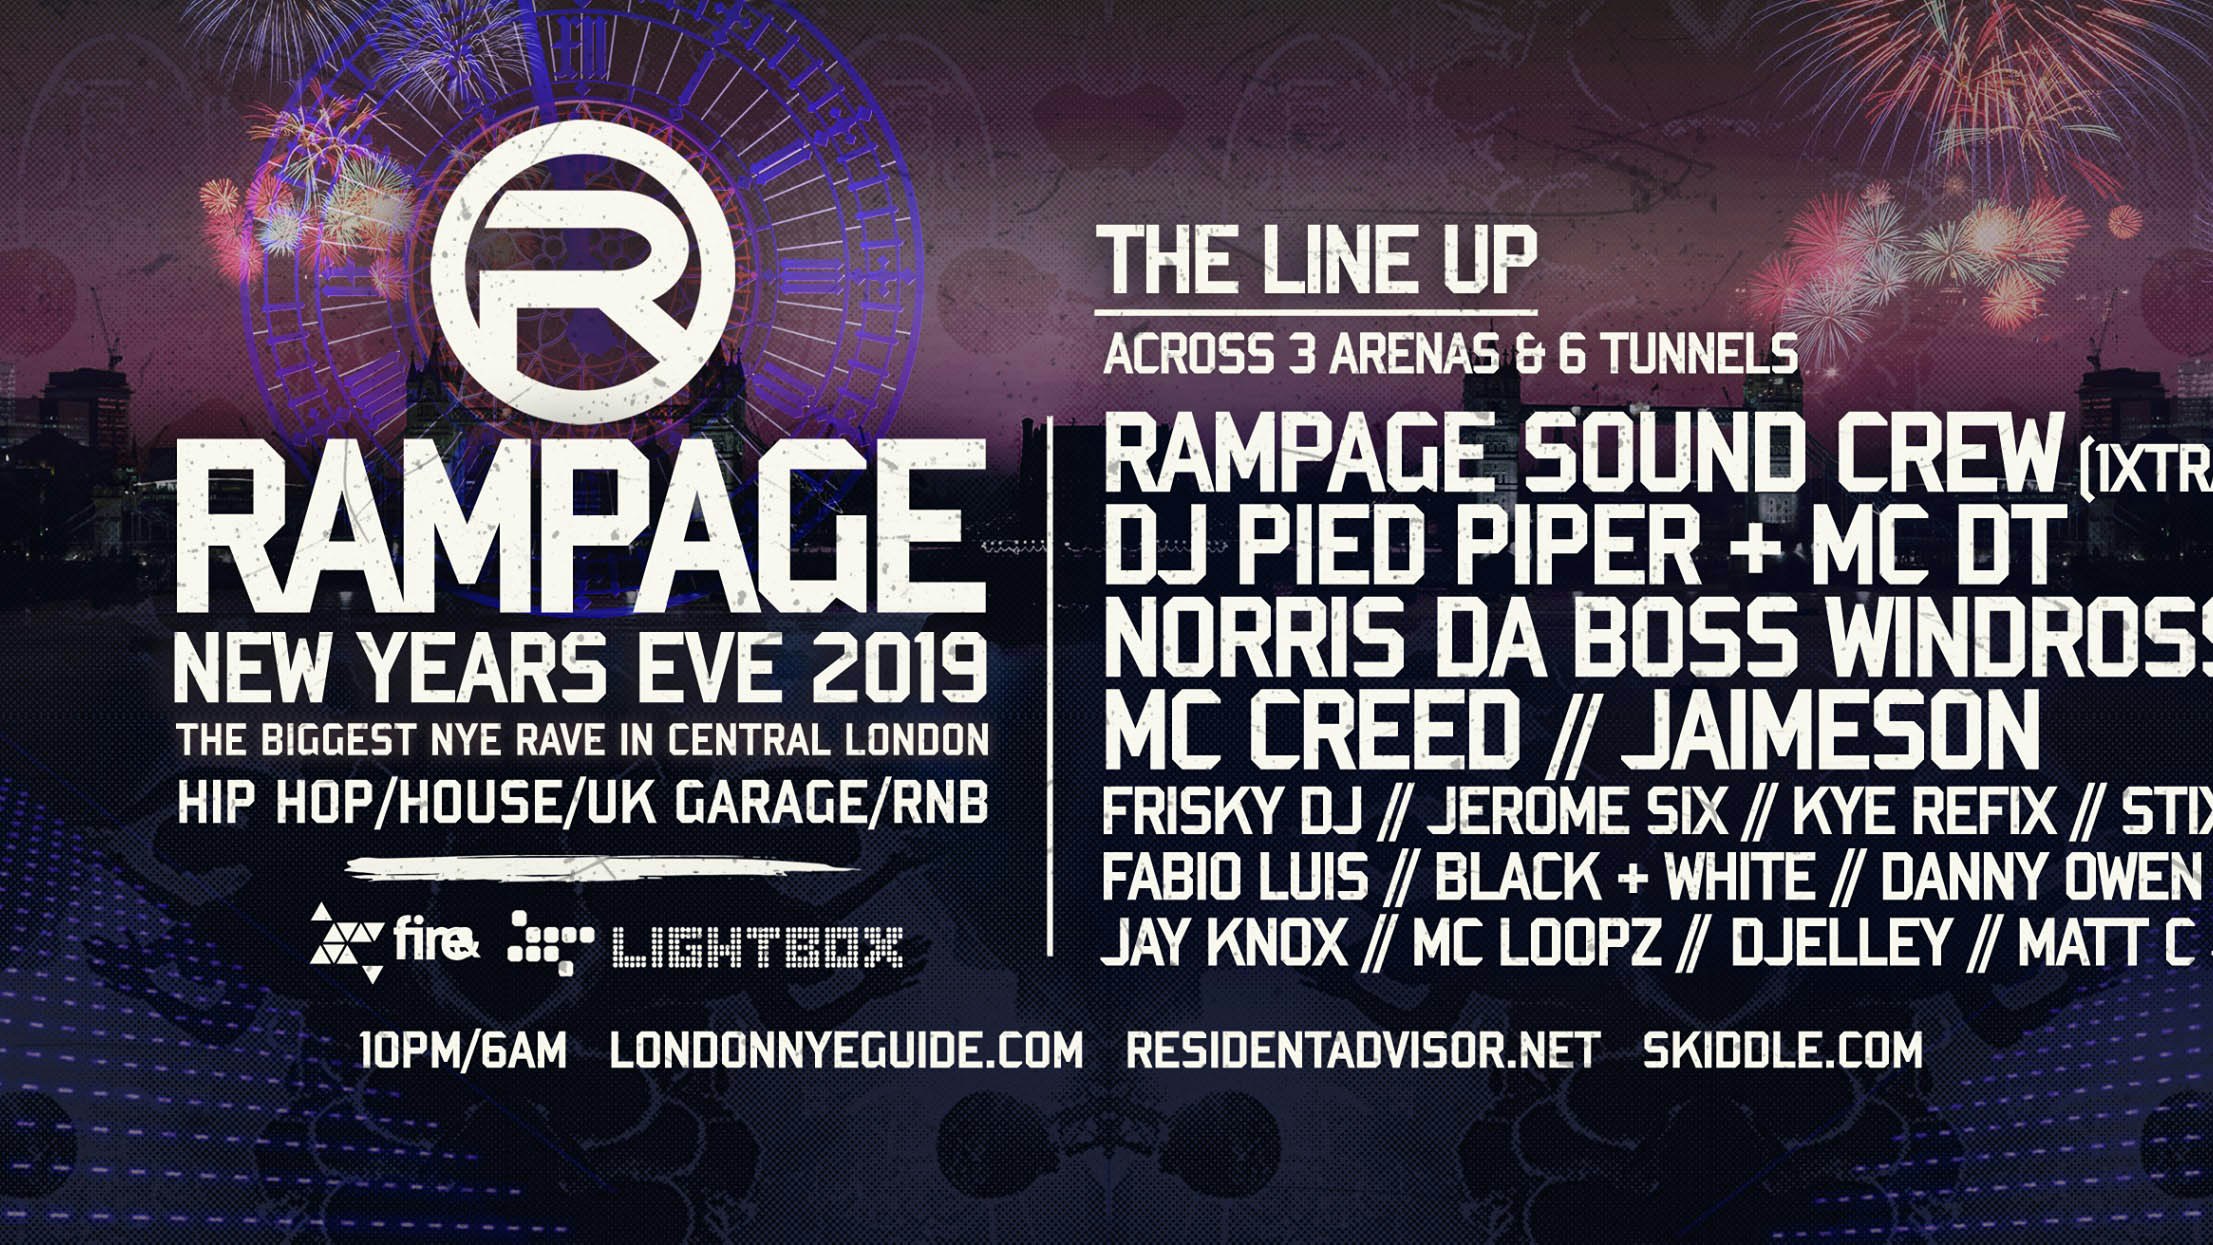 Rampage Sound New Years Eve Rave | Fire & Lightbox